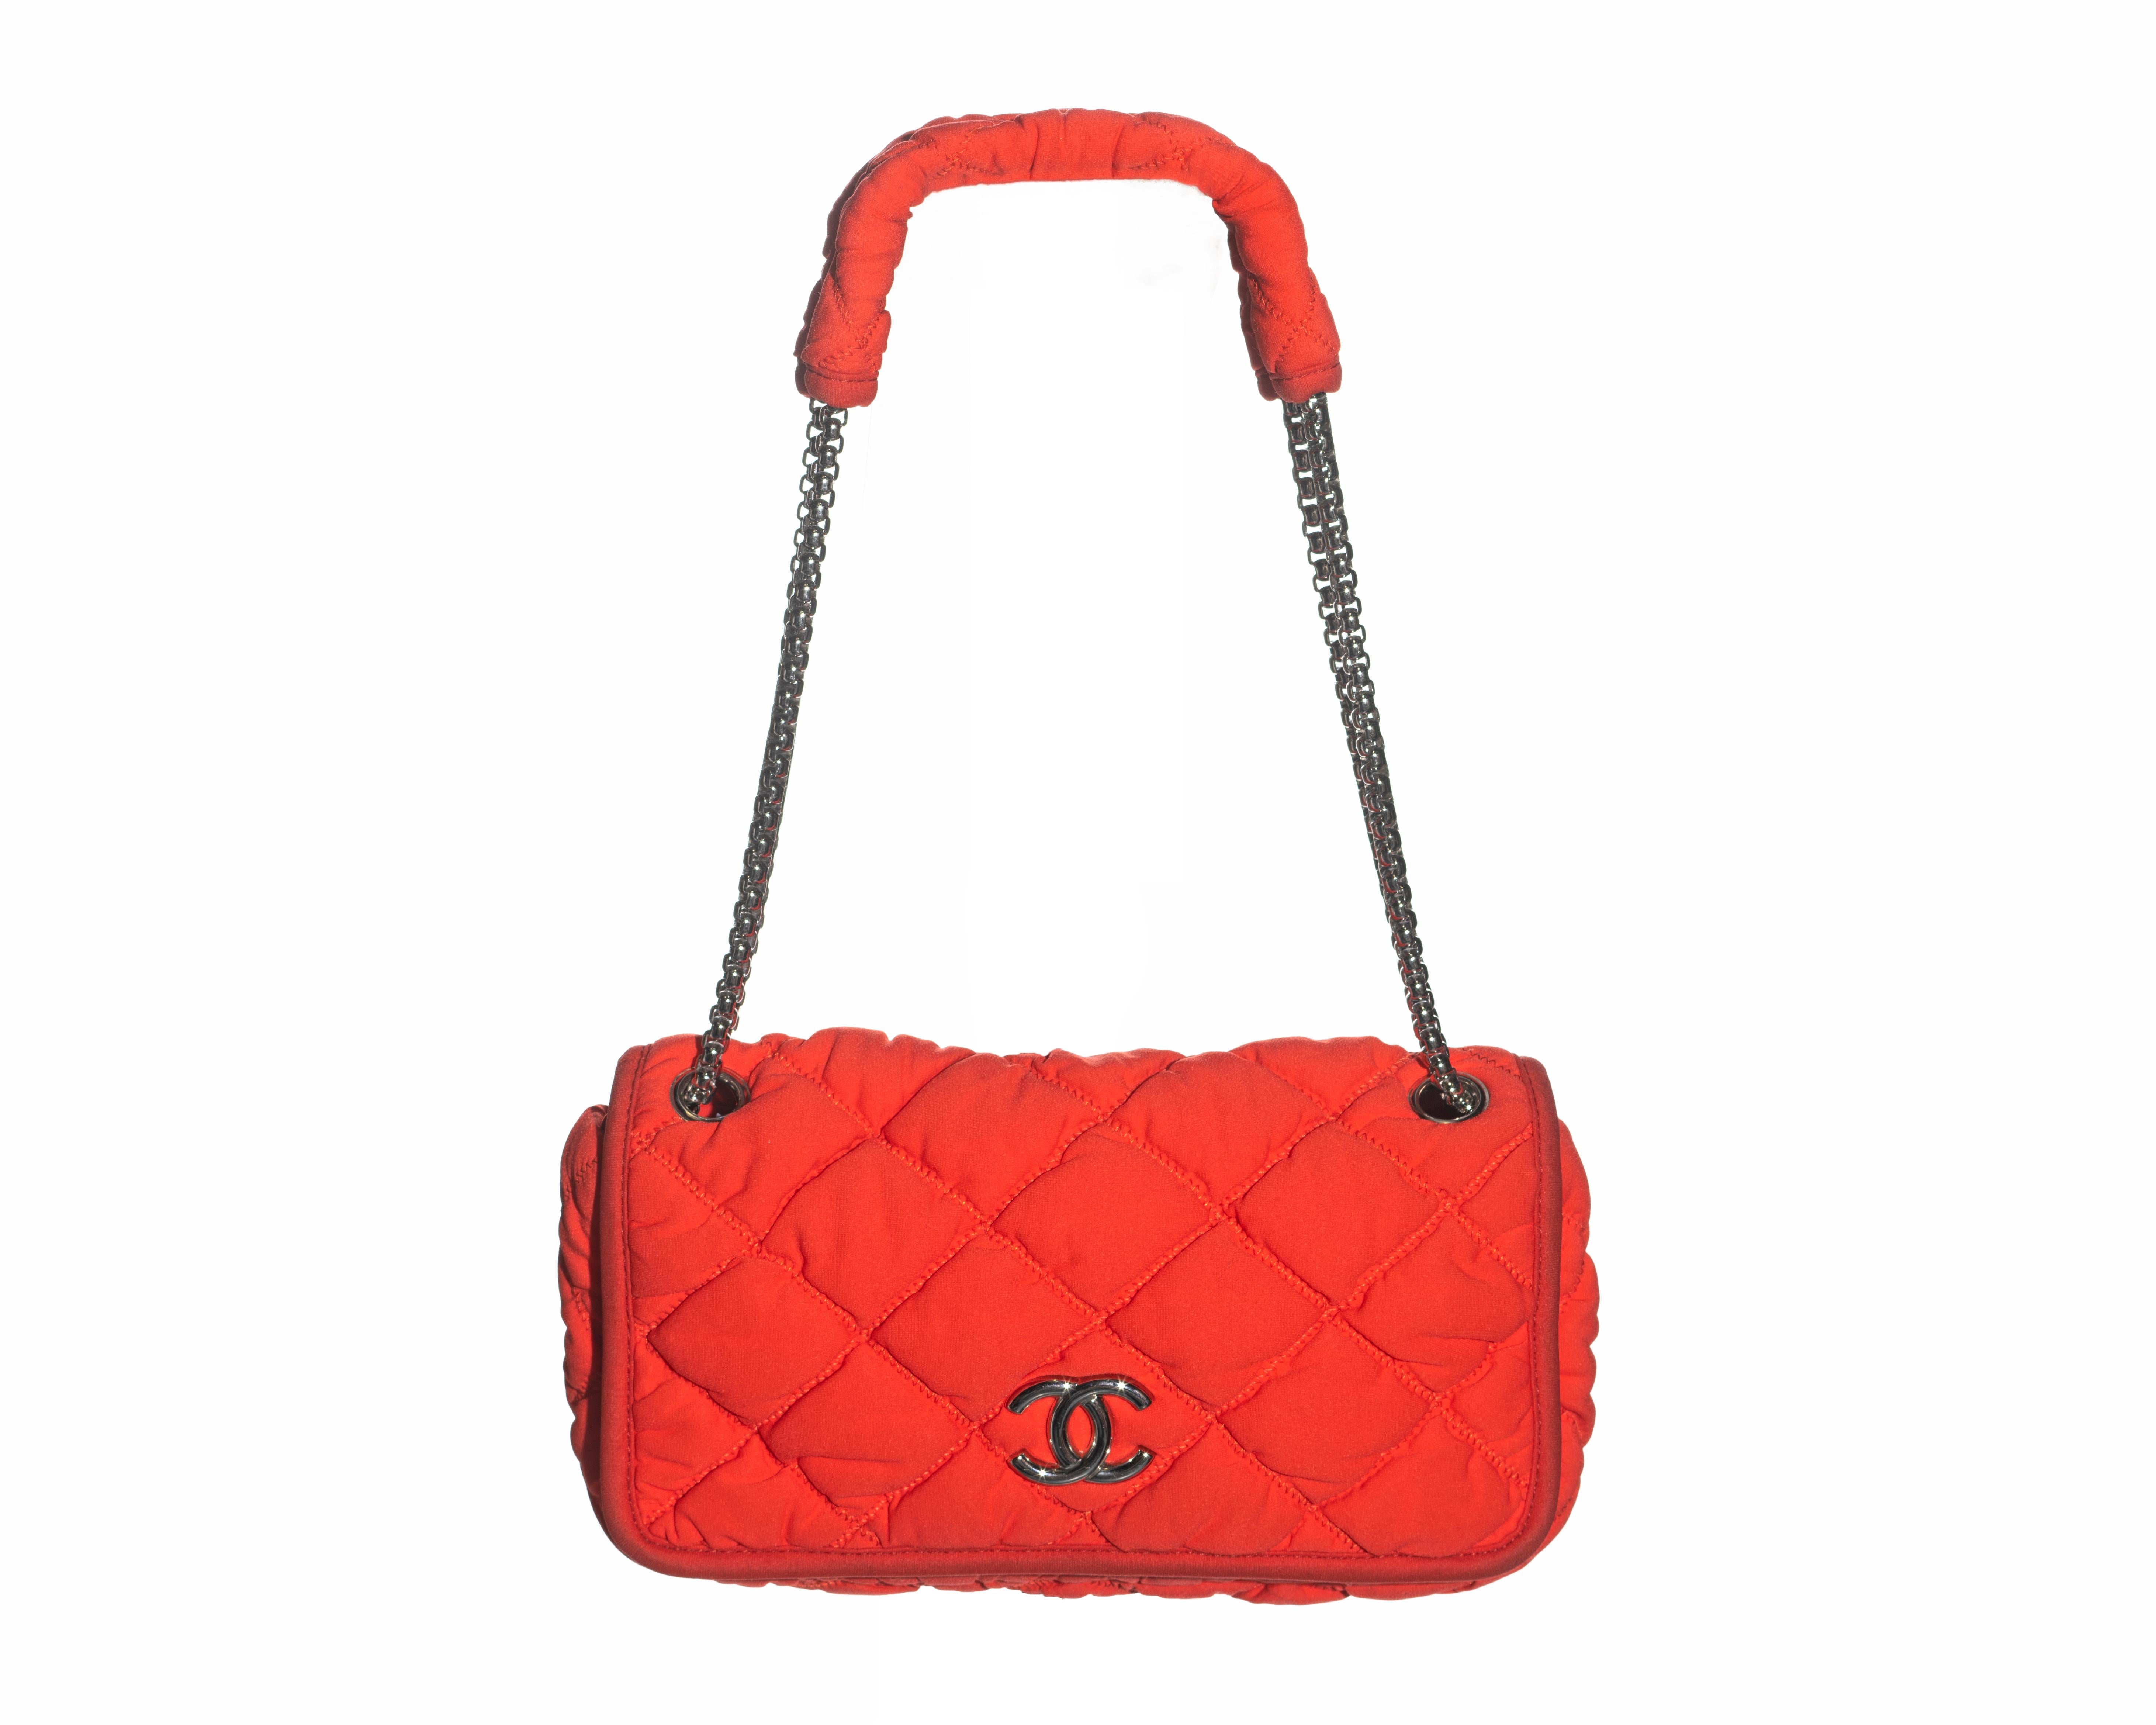 ▪ Chanel orange nylon flap bag 
▪ Bubble quilted 
▪ Silver 'Reissue' chain shoulder strap 
▪ CC logo clasp with magnetic closure 
▪ Silver satin lining 
▪ Comes with authenticity card
▪ c. 2008 - 2009
▪ Made in Italy